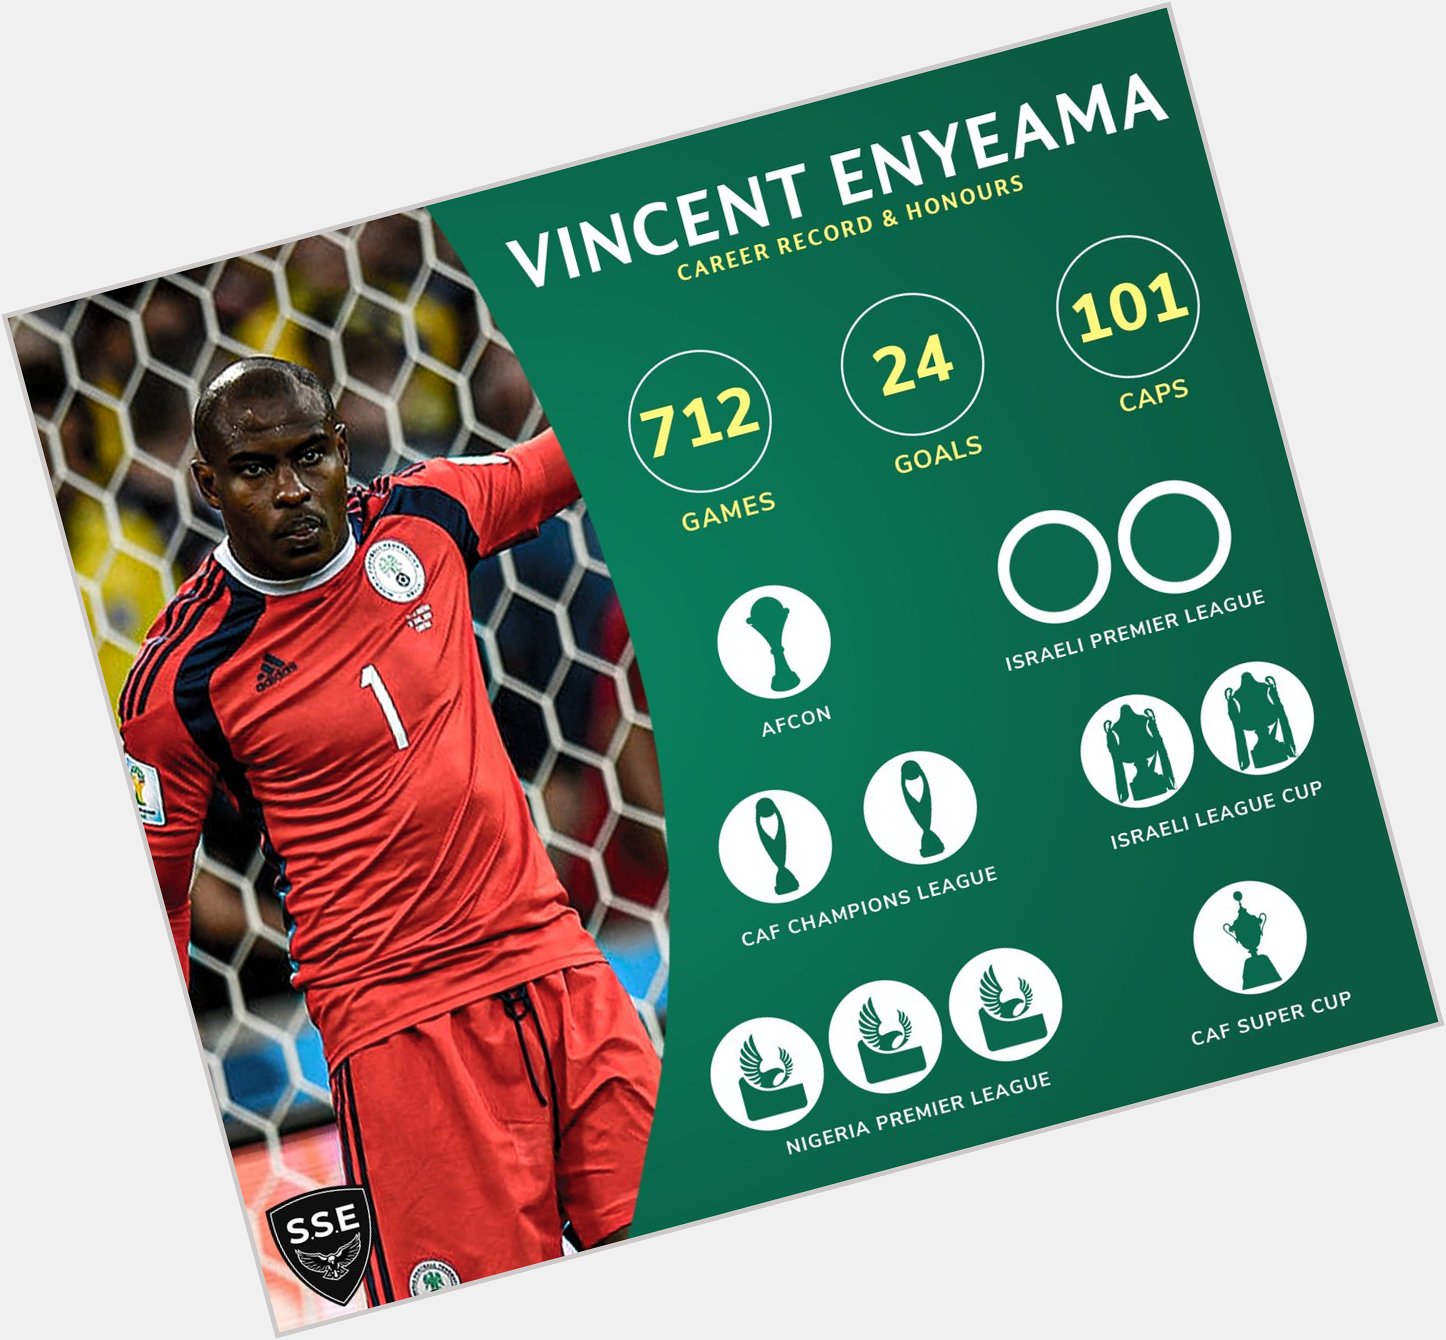 Happy birthday to Nigeria\s goalkeeper, Vincent Enyeama 

To more great leaps  